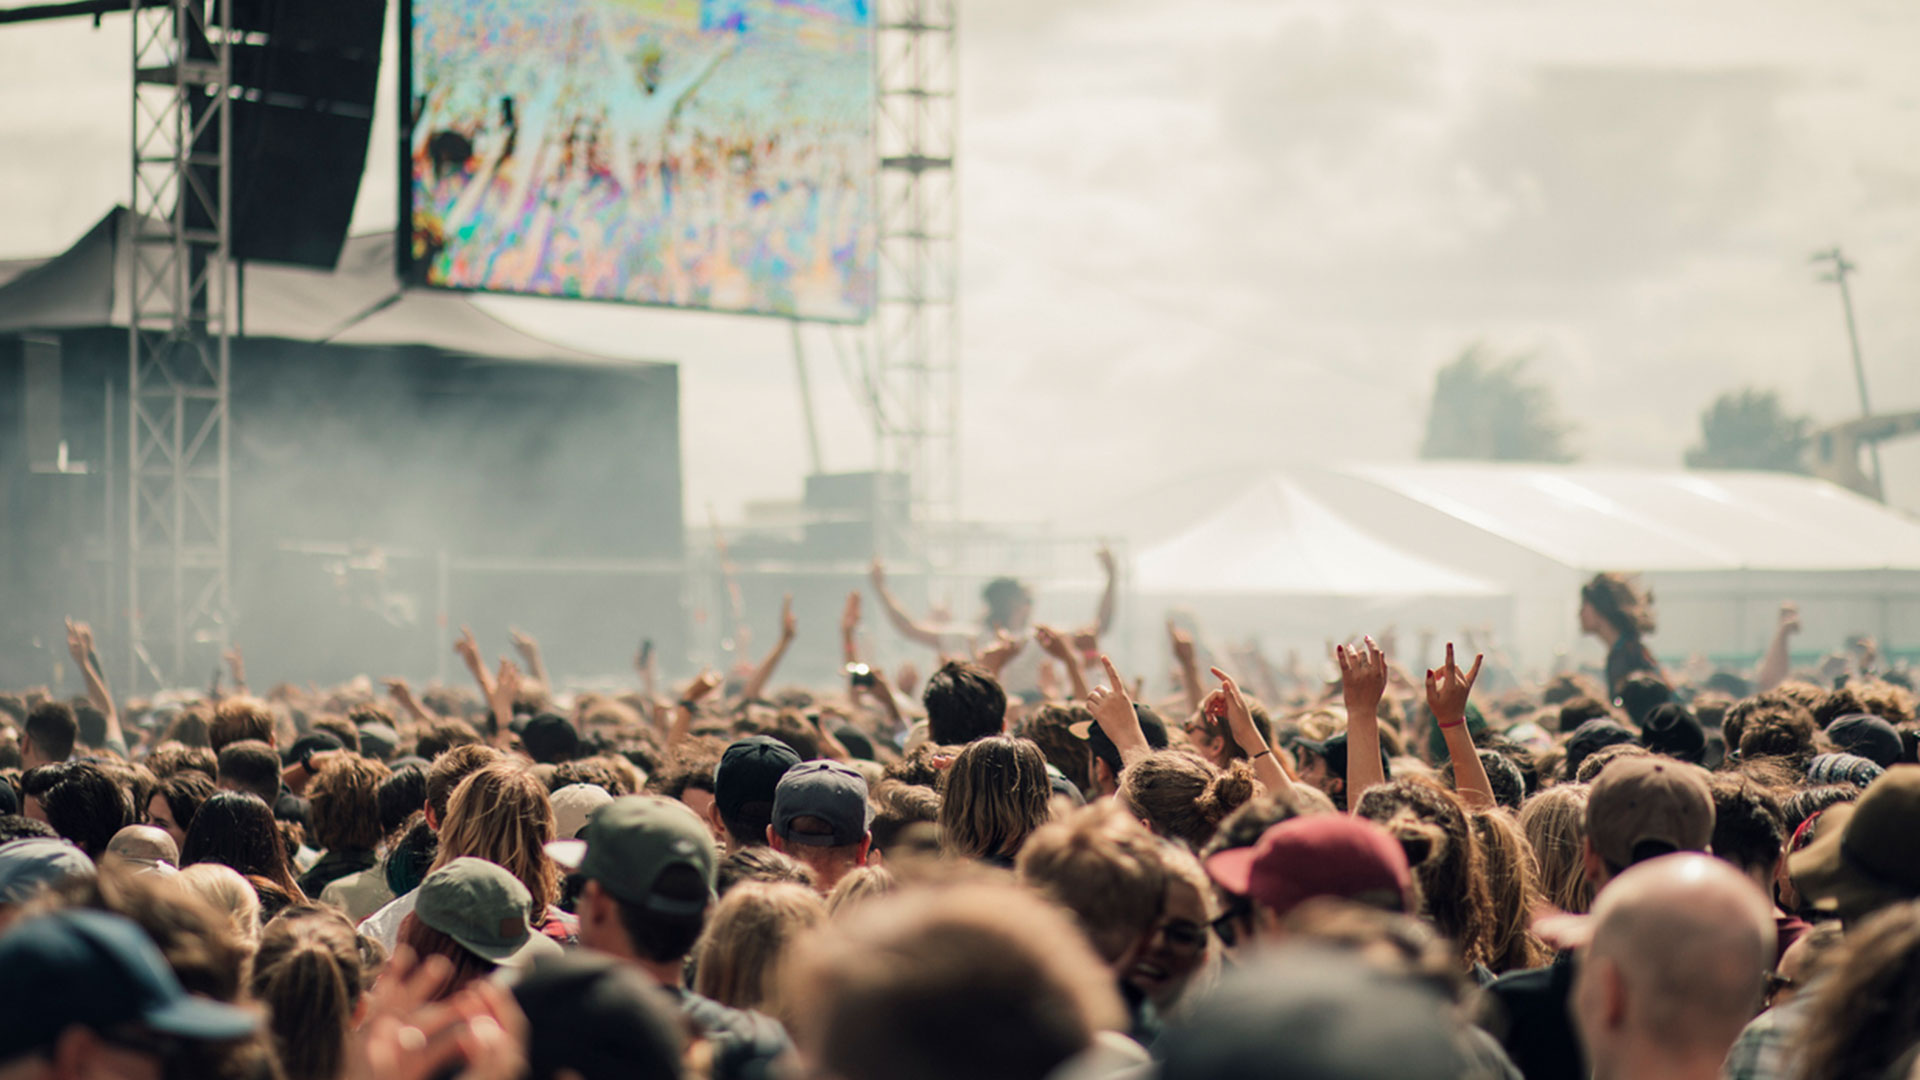 Expert Tips to Make Your Outdoor Events & Concerts More Successful